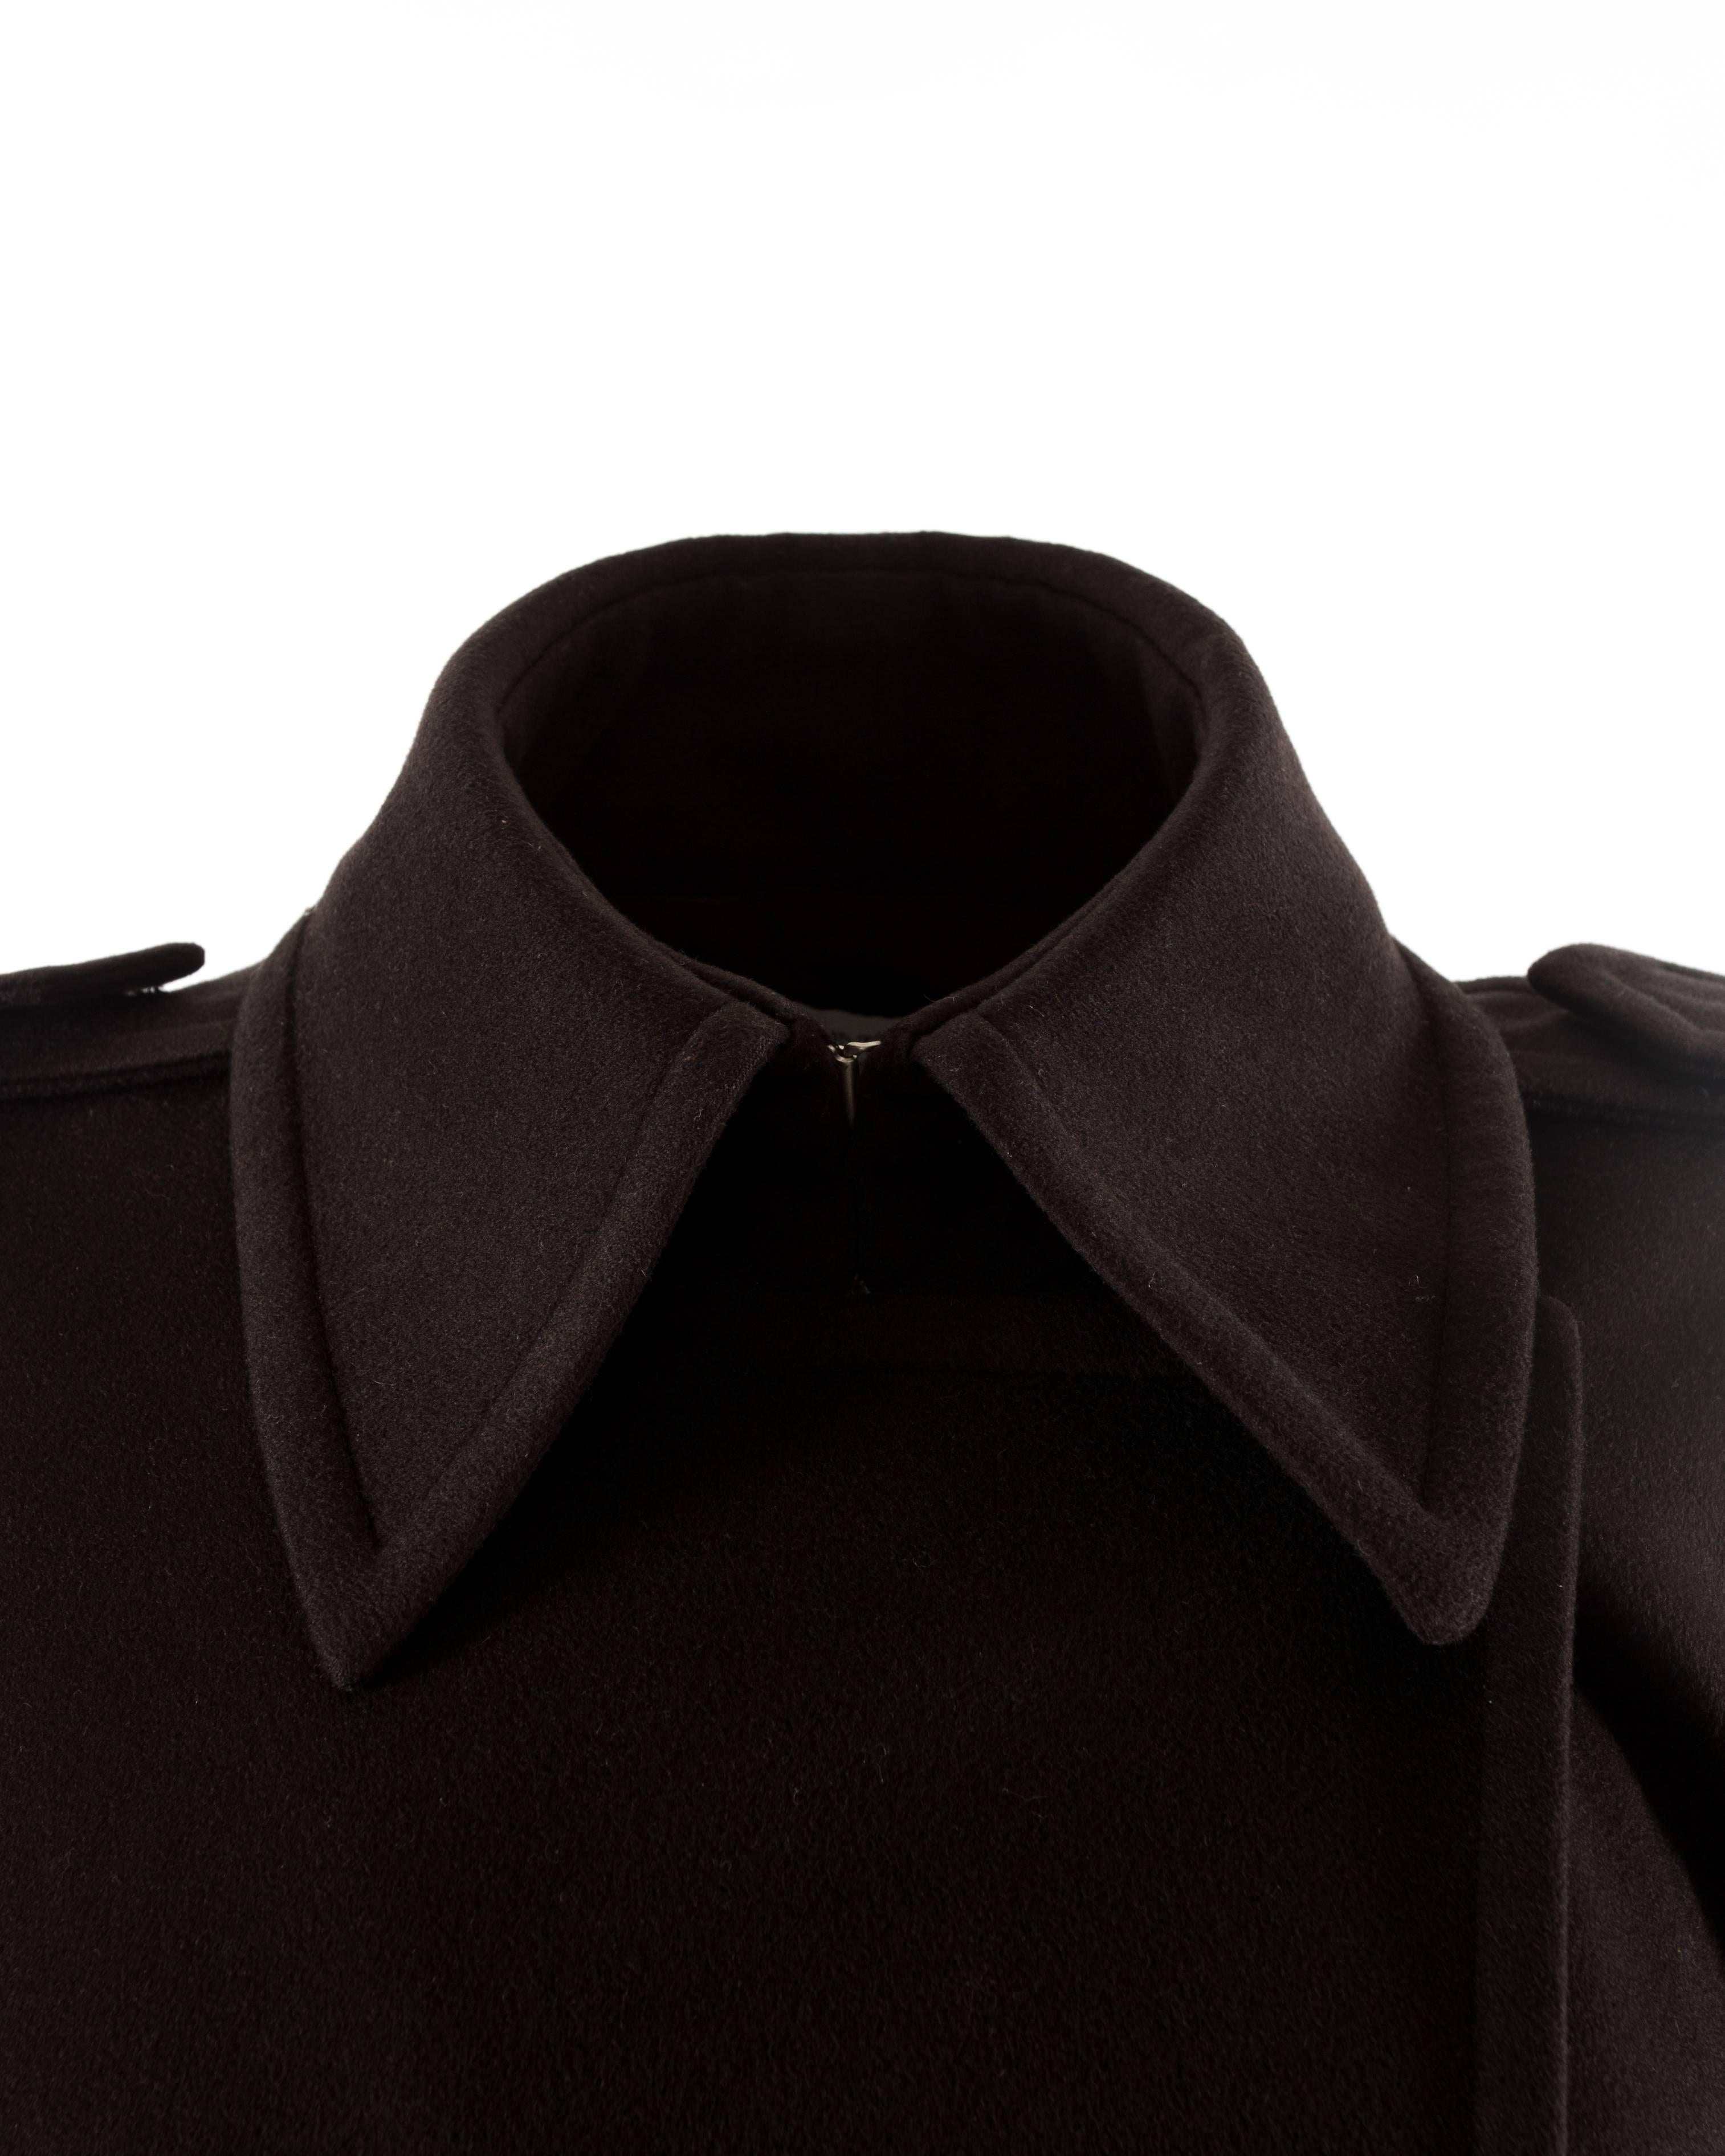 Black Yves Saint Laurent by Tom Ford autumn-winter 2001 brown wool military coat